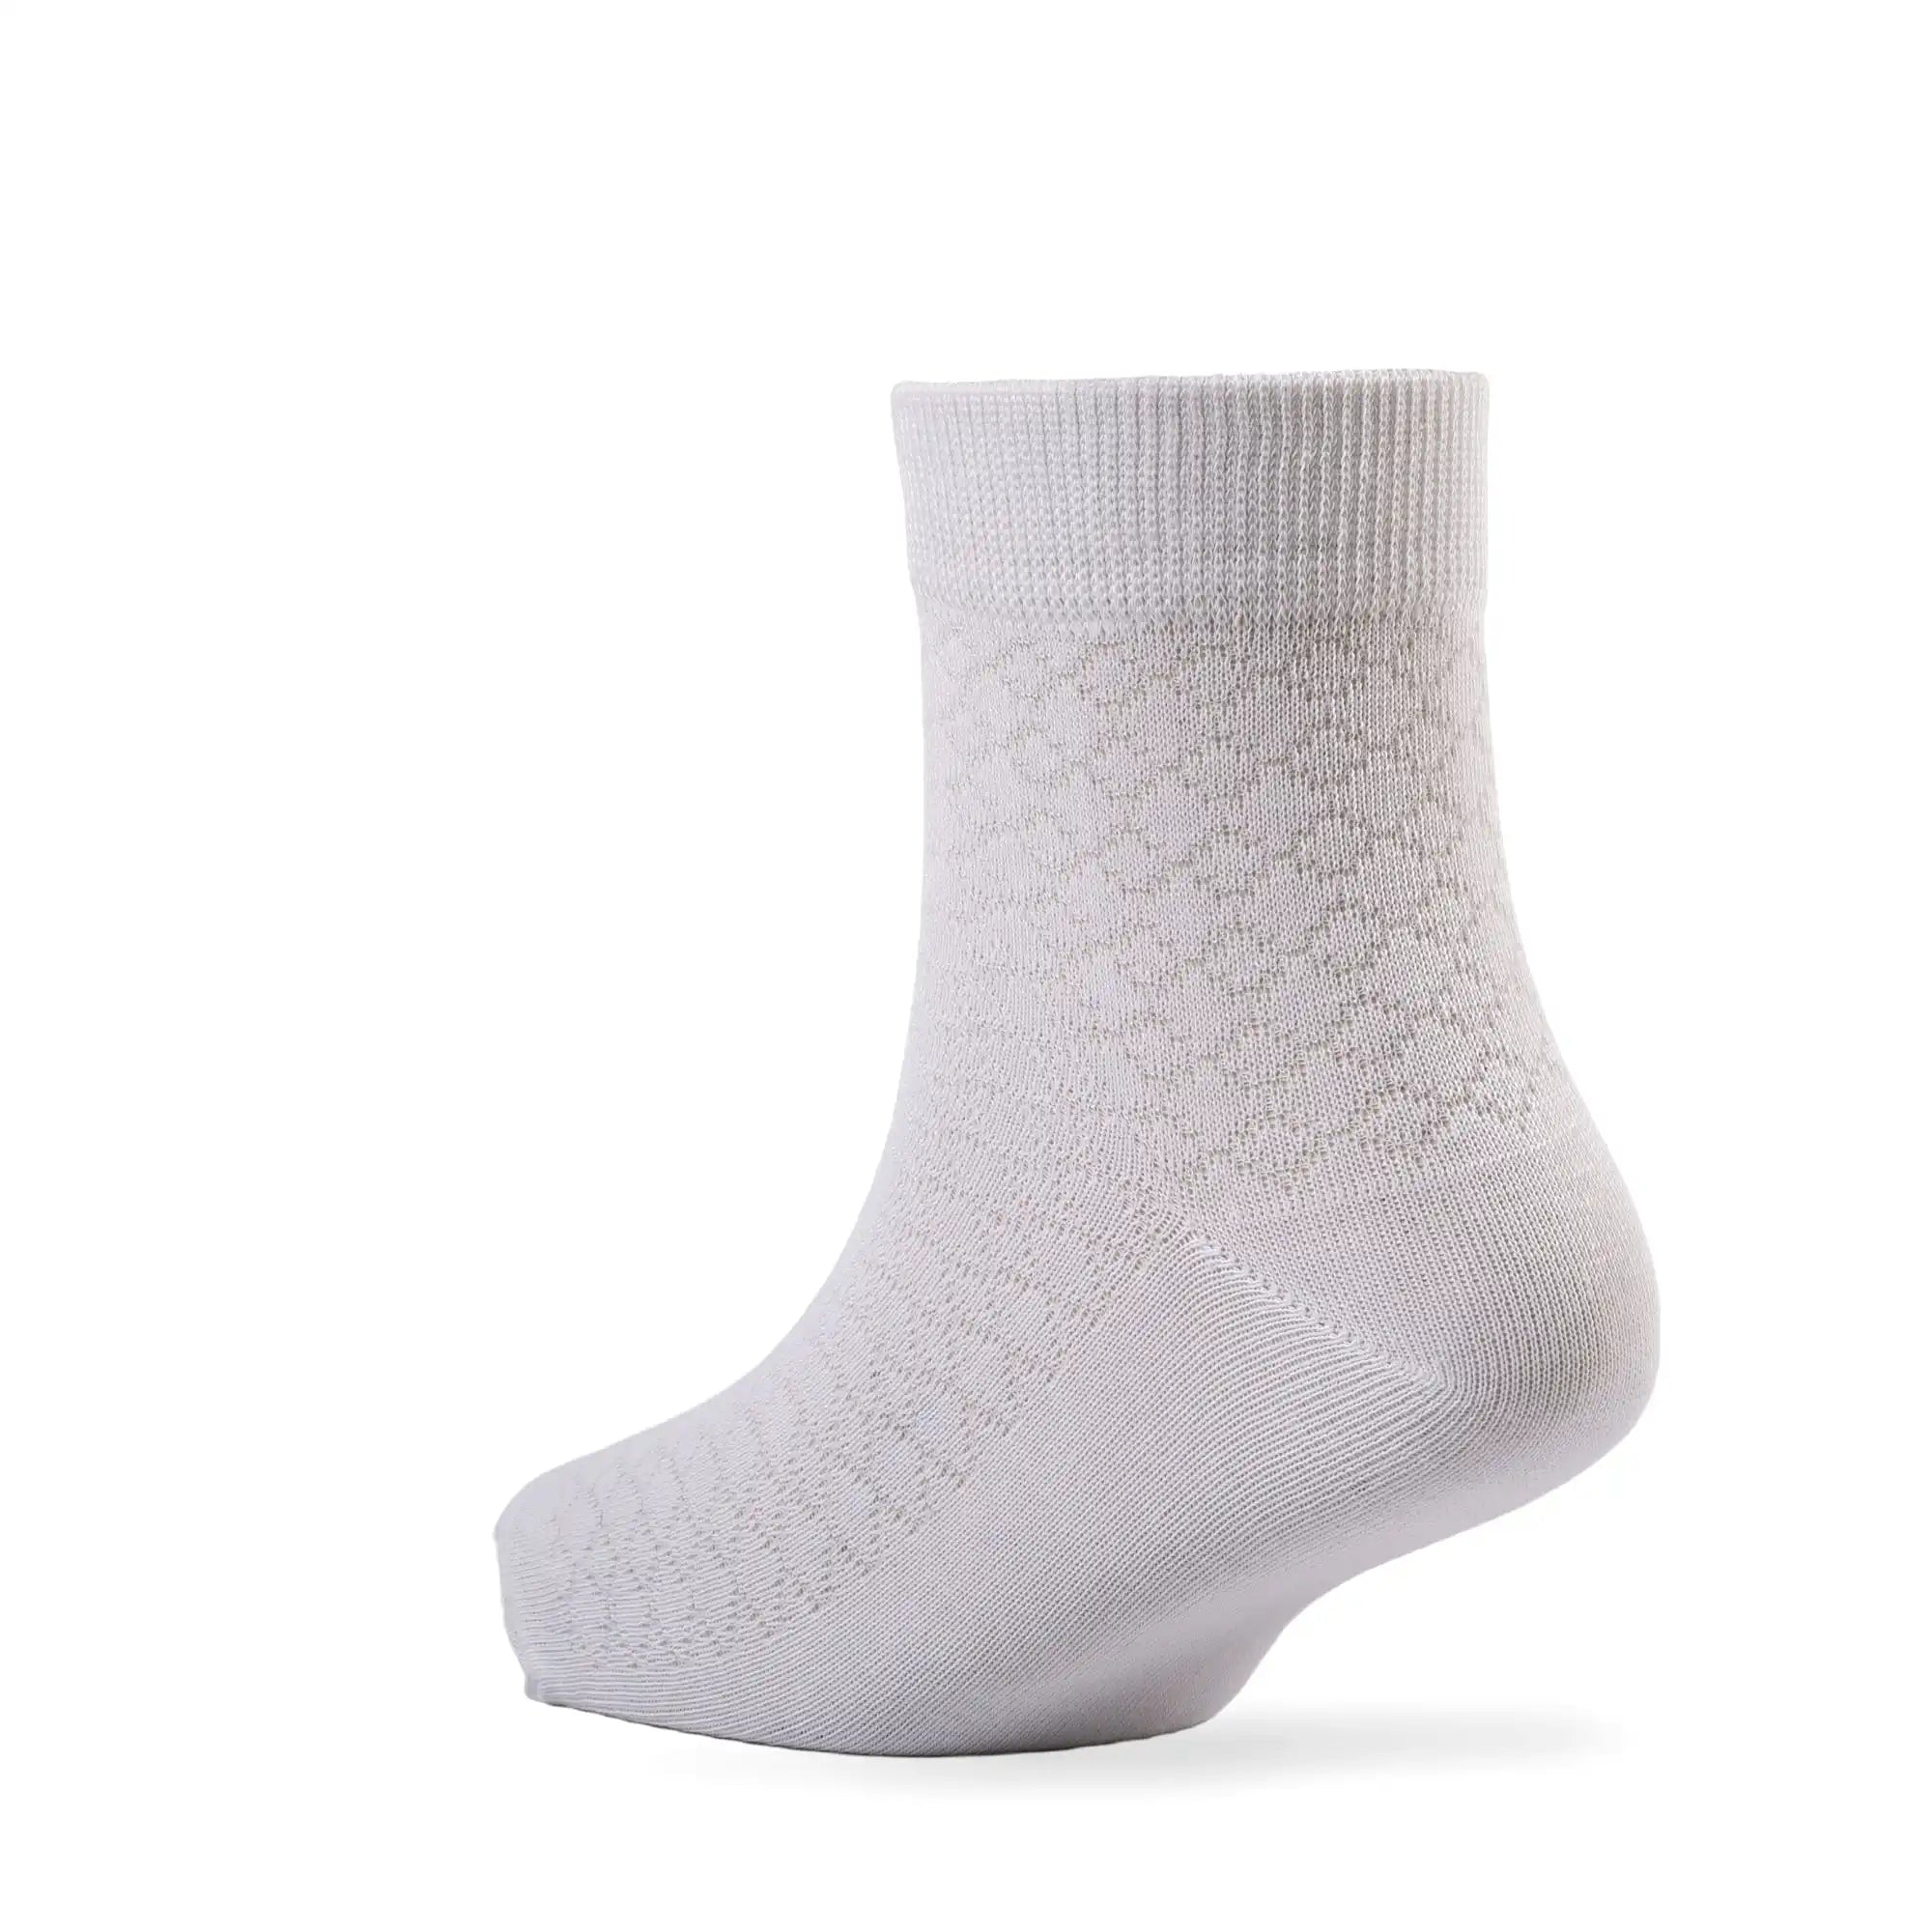 Young Wings Men's White Colour Cotton Fabric Solid Ankle Length Socks - Pack of 5, Style no. 2302-M1